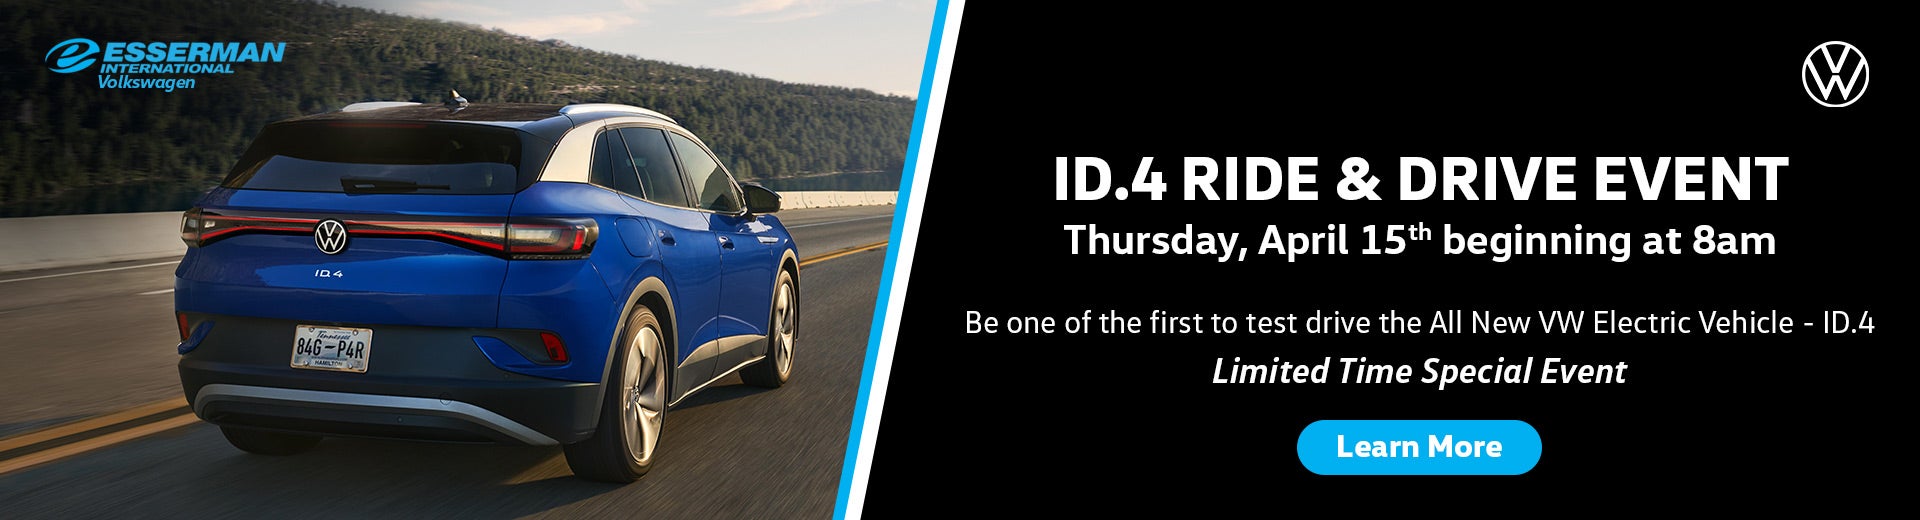 ID.4 Ride and Drive Event April 15th